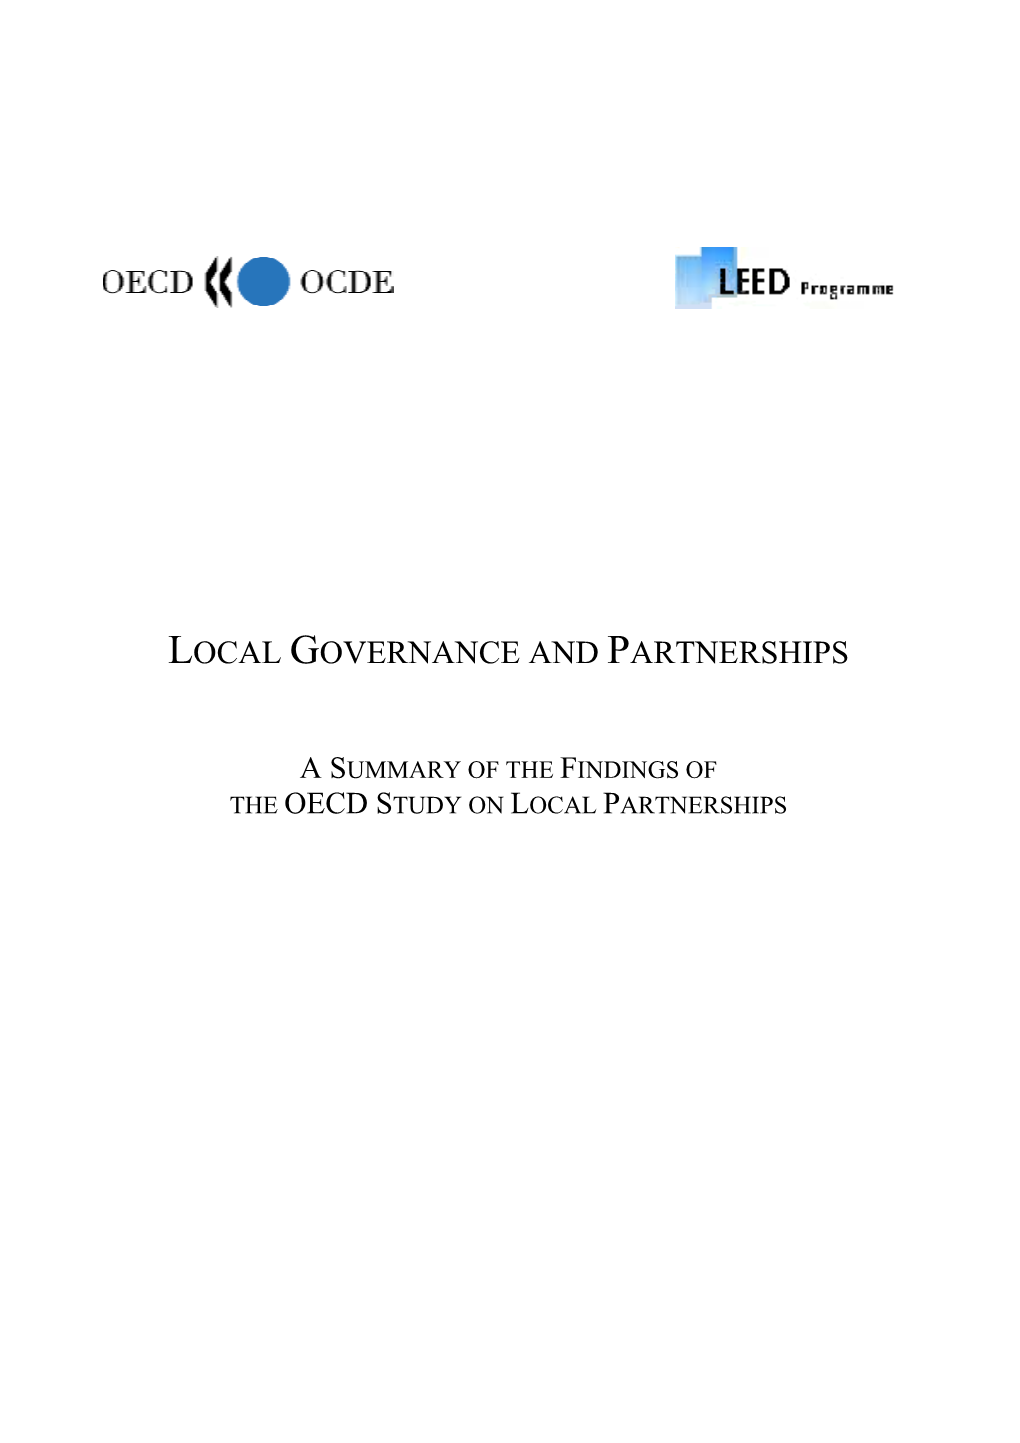 Local Governance and Partnerships